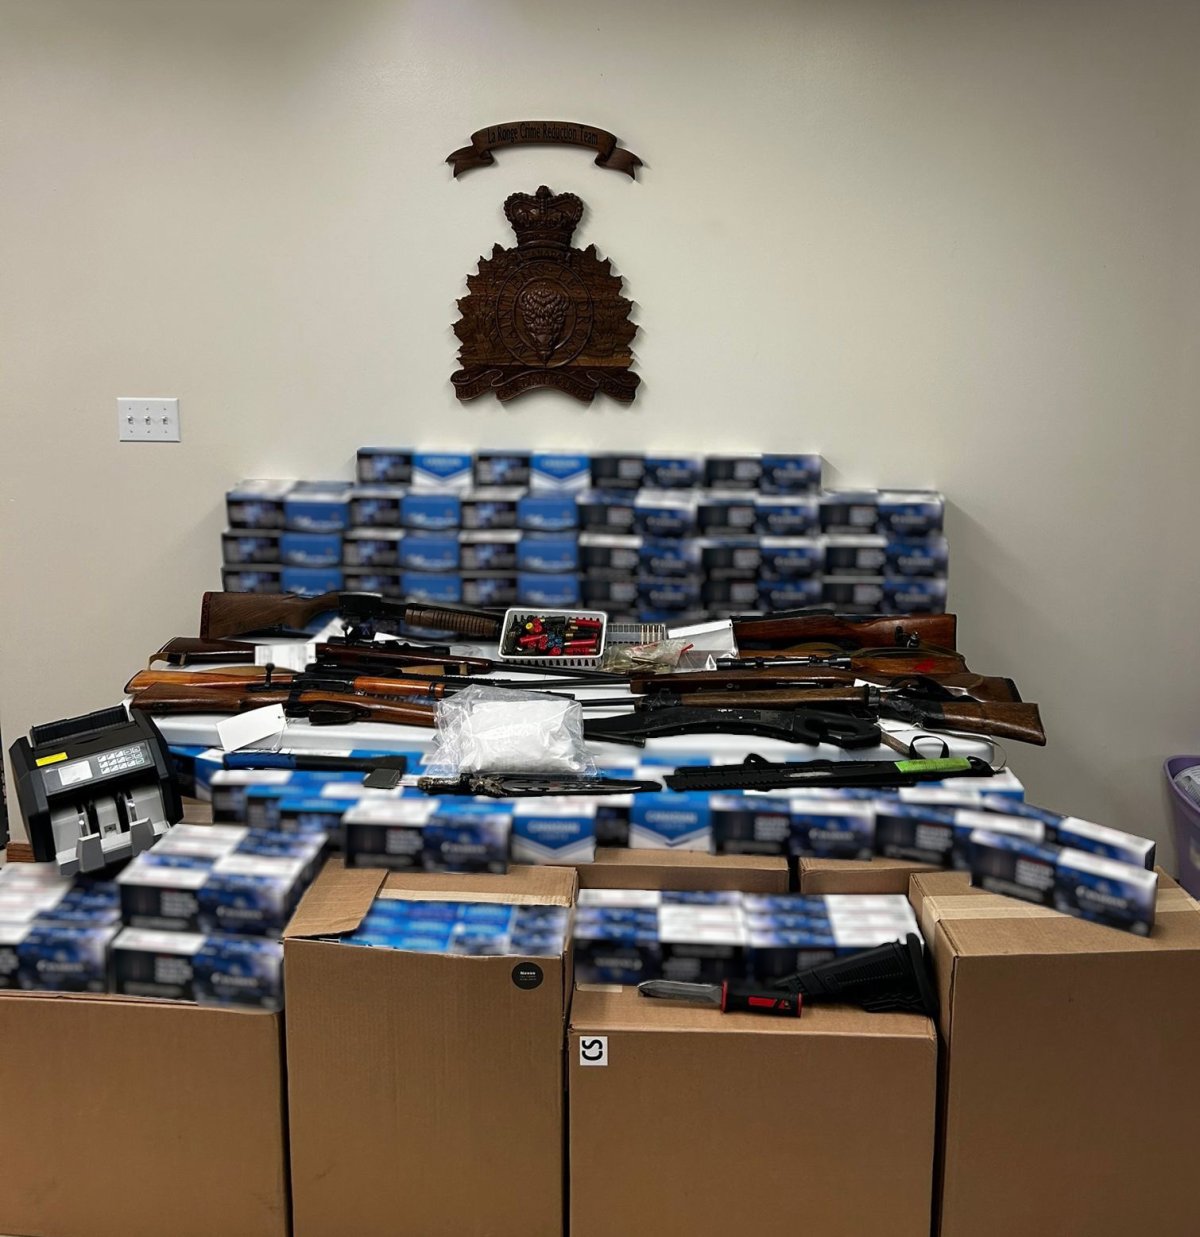 Saskatchewan RCMP say they seized 110,000 illegal cigarettes, one kilogram of morphine powder, eight firearms, and trafficking paraphernalia in the La Ronge area during a bust on May 16.